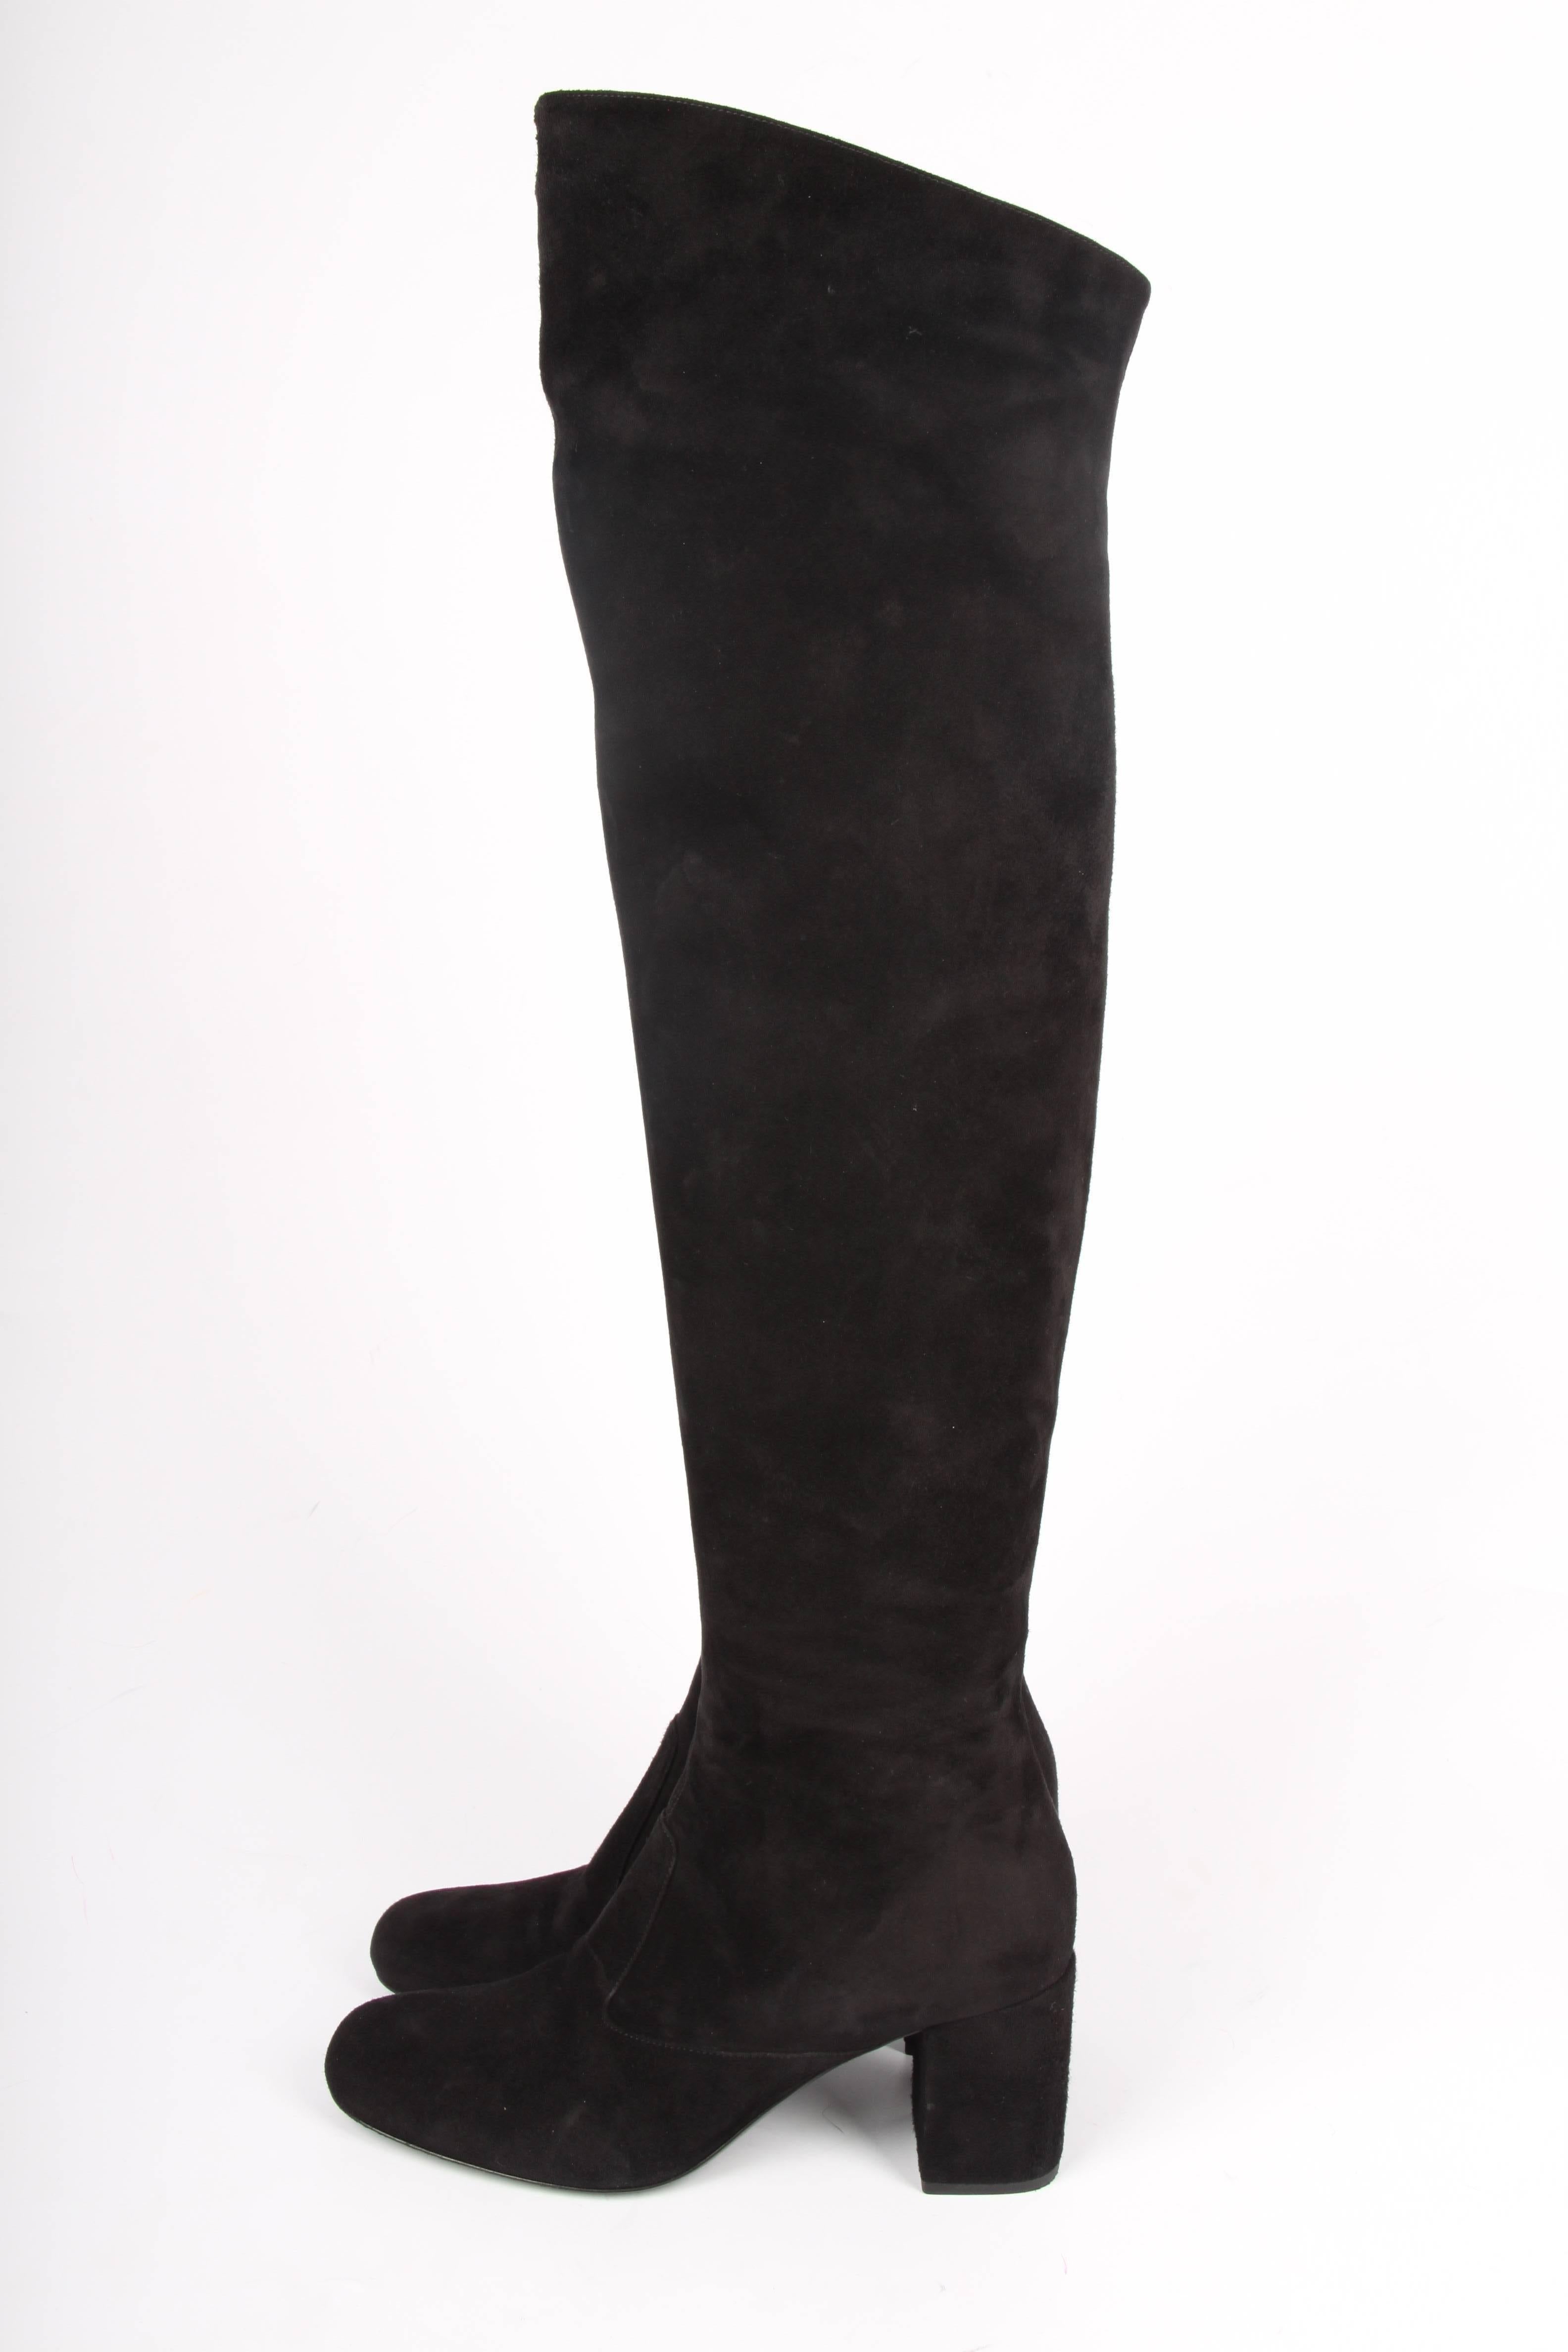 Suede overknee boots by Saint Laurent. Cool!

A block heel that measures 7 centimeters and a round toe. The shaft is 58 centimeters long and has a zipper on one side, ø 40 centimeter. Fully lined with black leather on the interior. Black leather